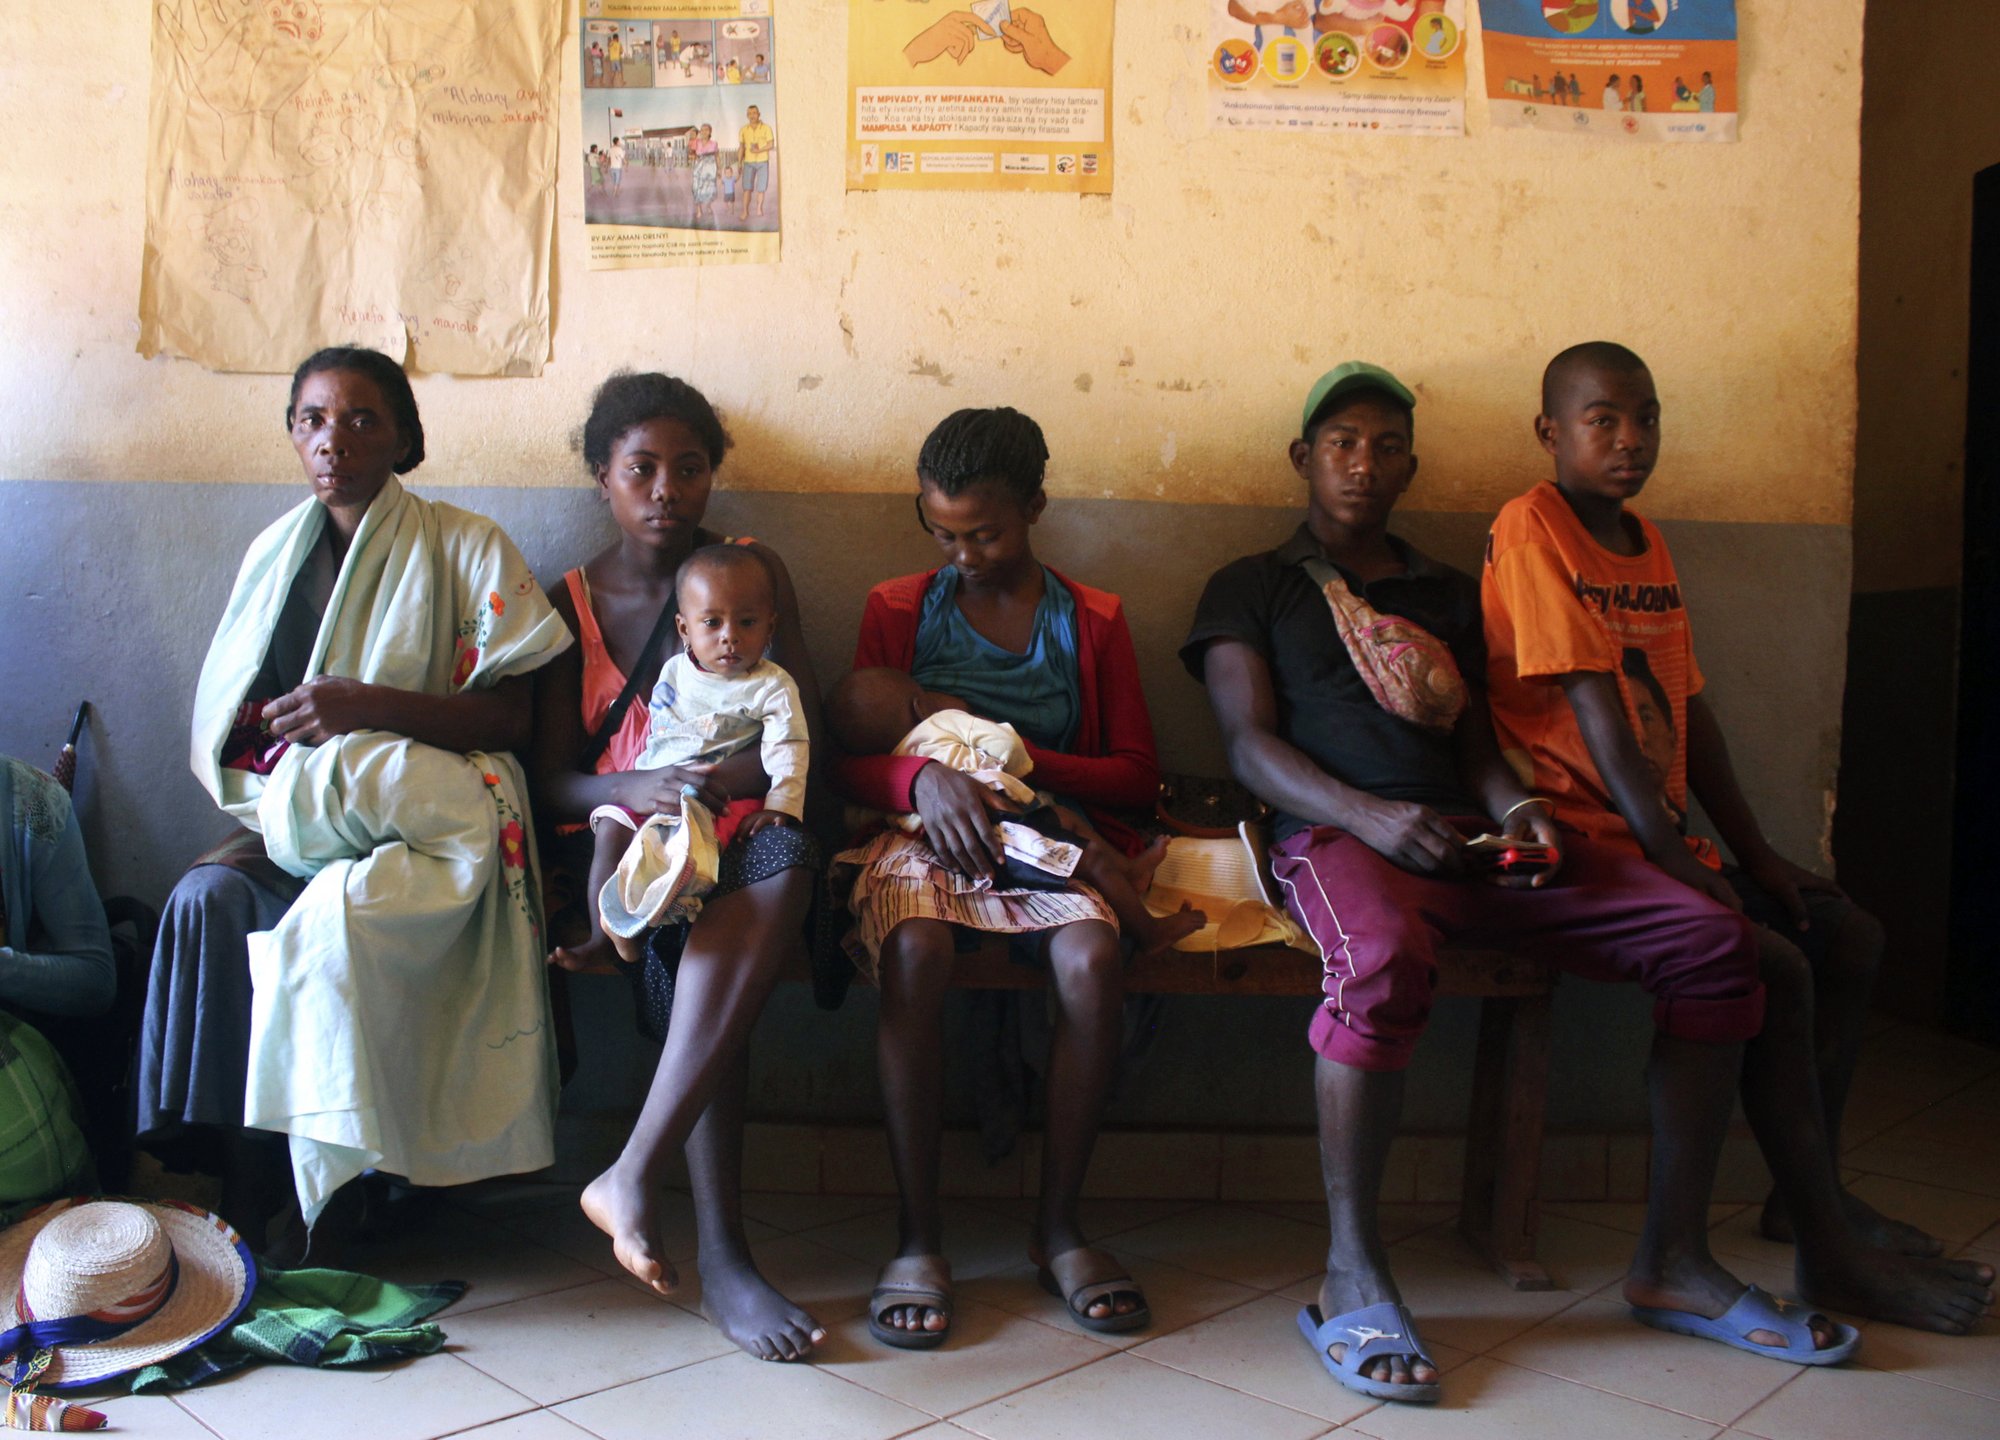 In this photo taken Thursday, March 21, 2019, mothers wait to have their babies vaccinated against measles, at a healthcare center in Larintsena, Madagascar. As the island nation faces its largest measles outbreak in history and cases soar well beyond 115,000, the problem is not centered on whether to vaccinate children. Many parents would like to do so but face immense challenges including the lack of resources and information. (AP Photo/Laetitia Bezain)